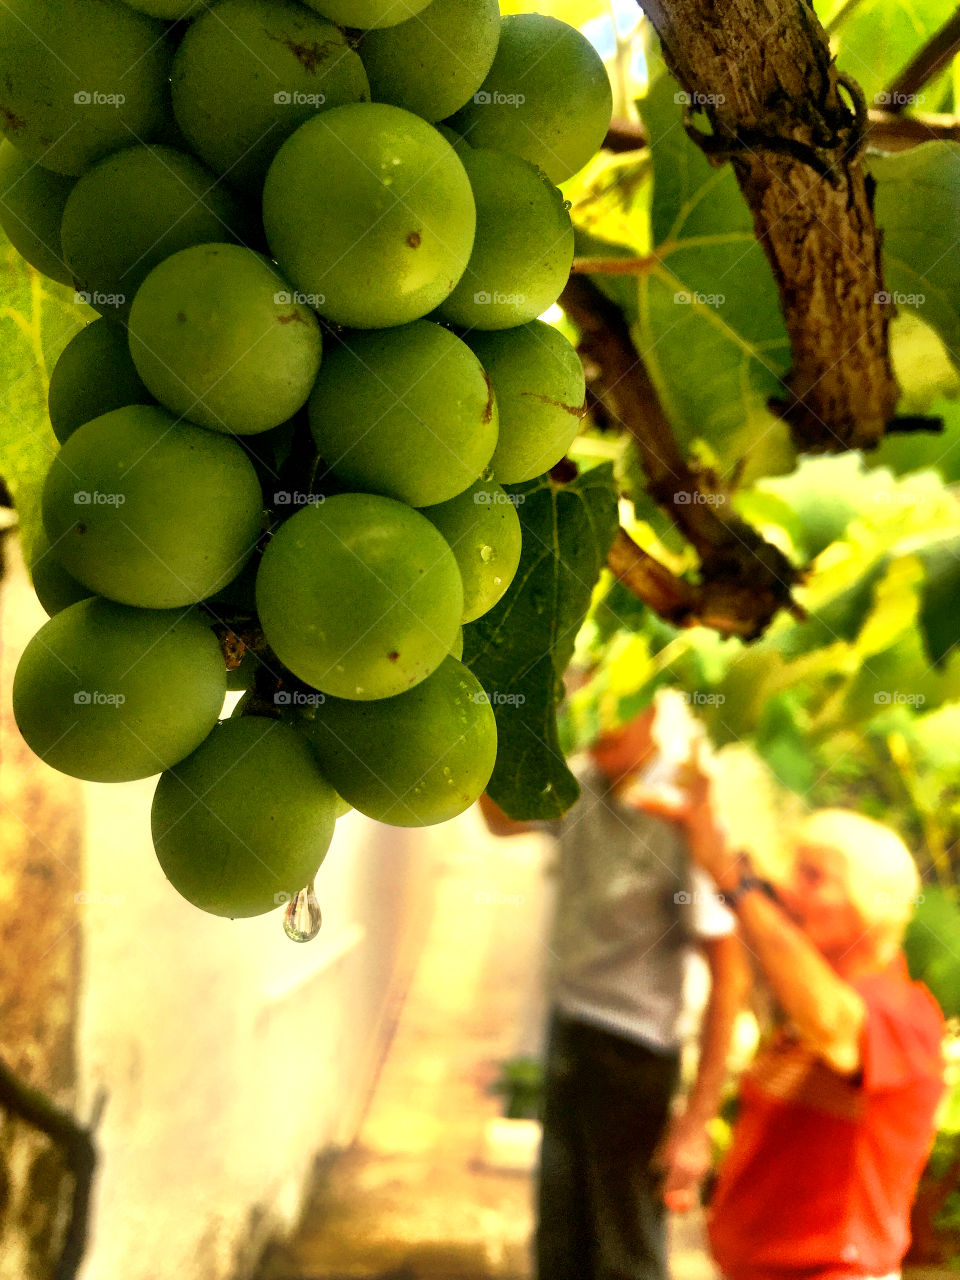 Grapes from my grandmother's garden.